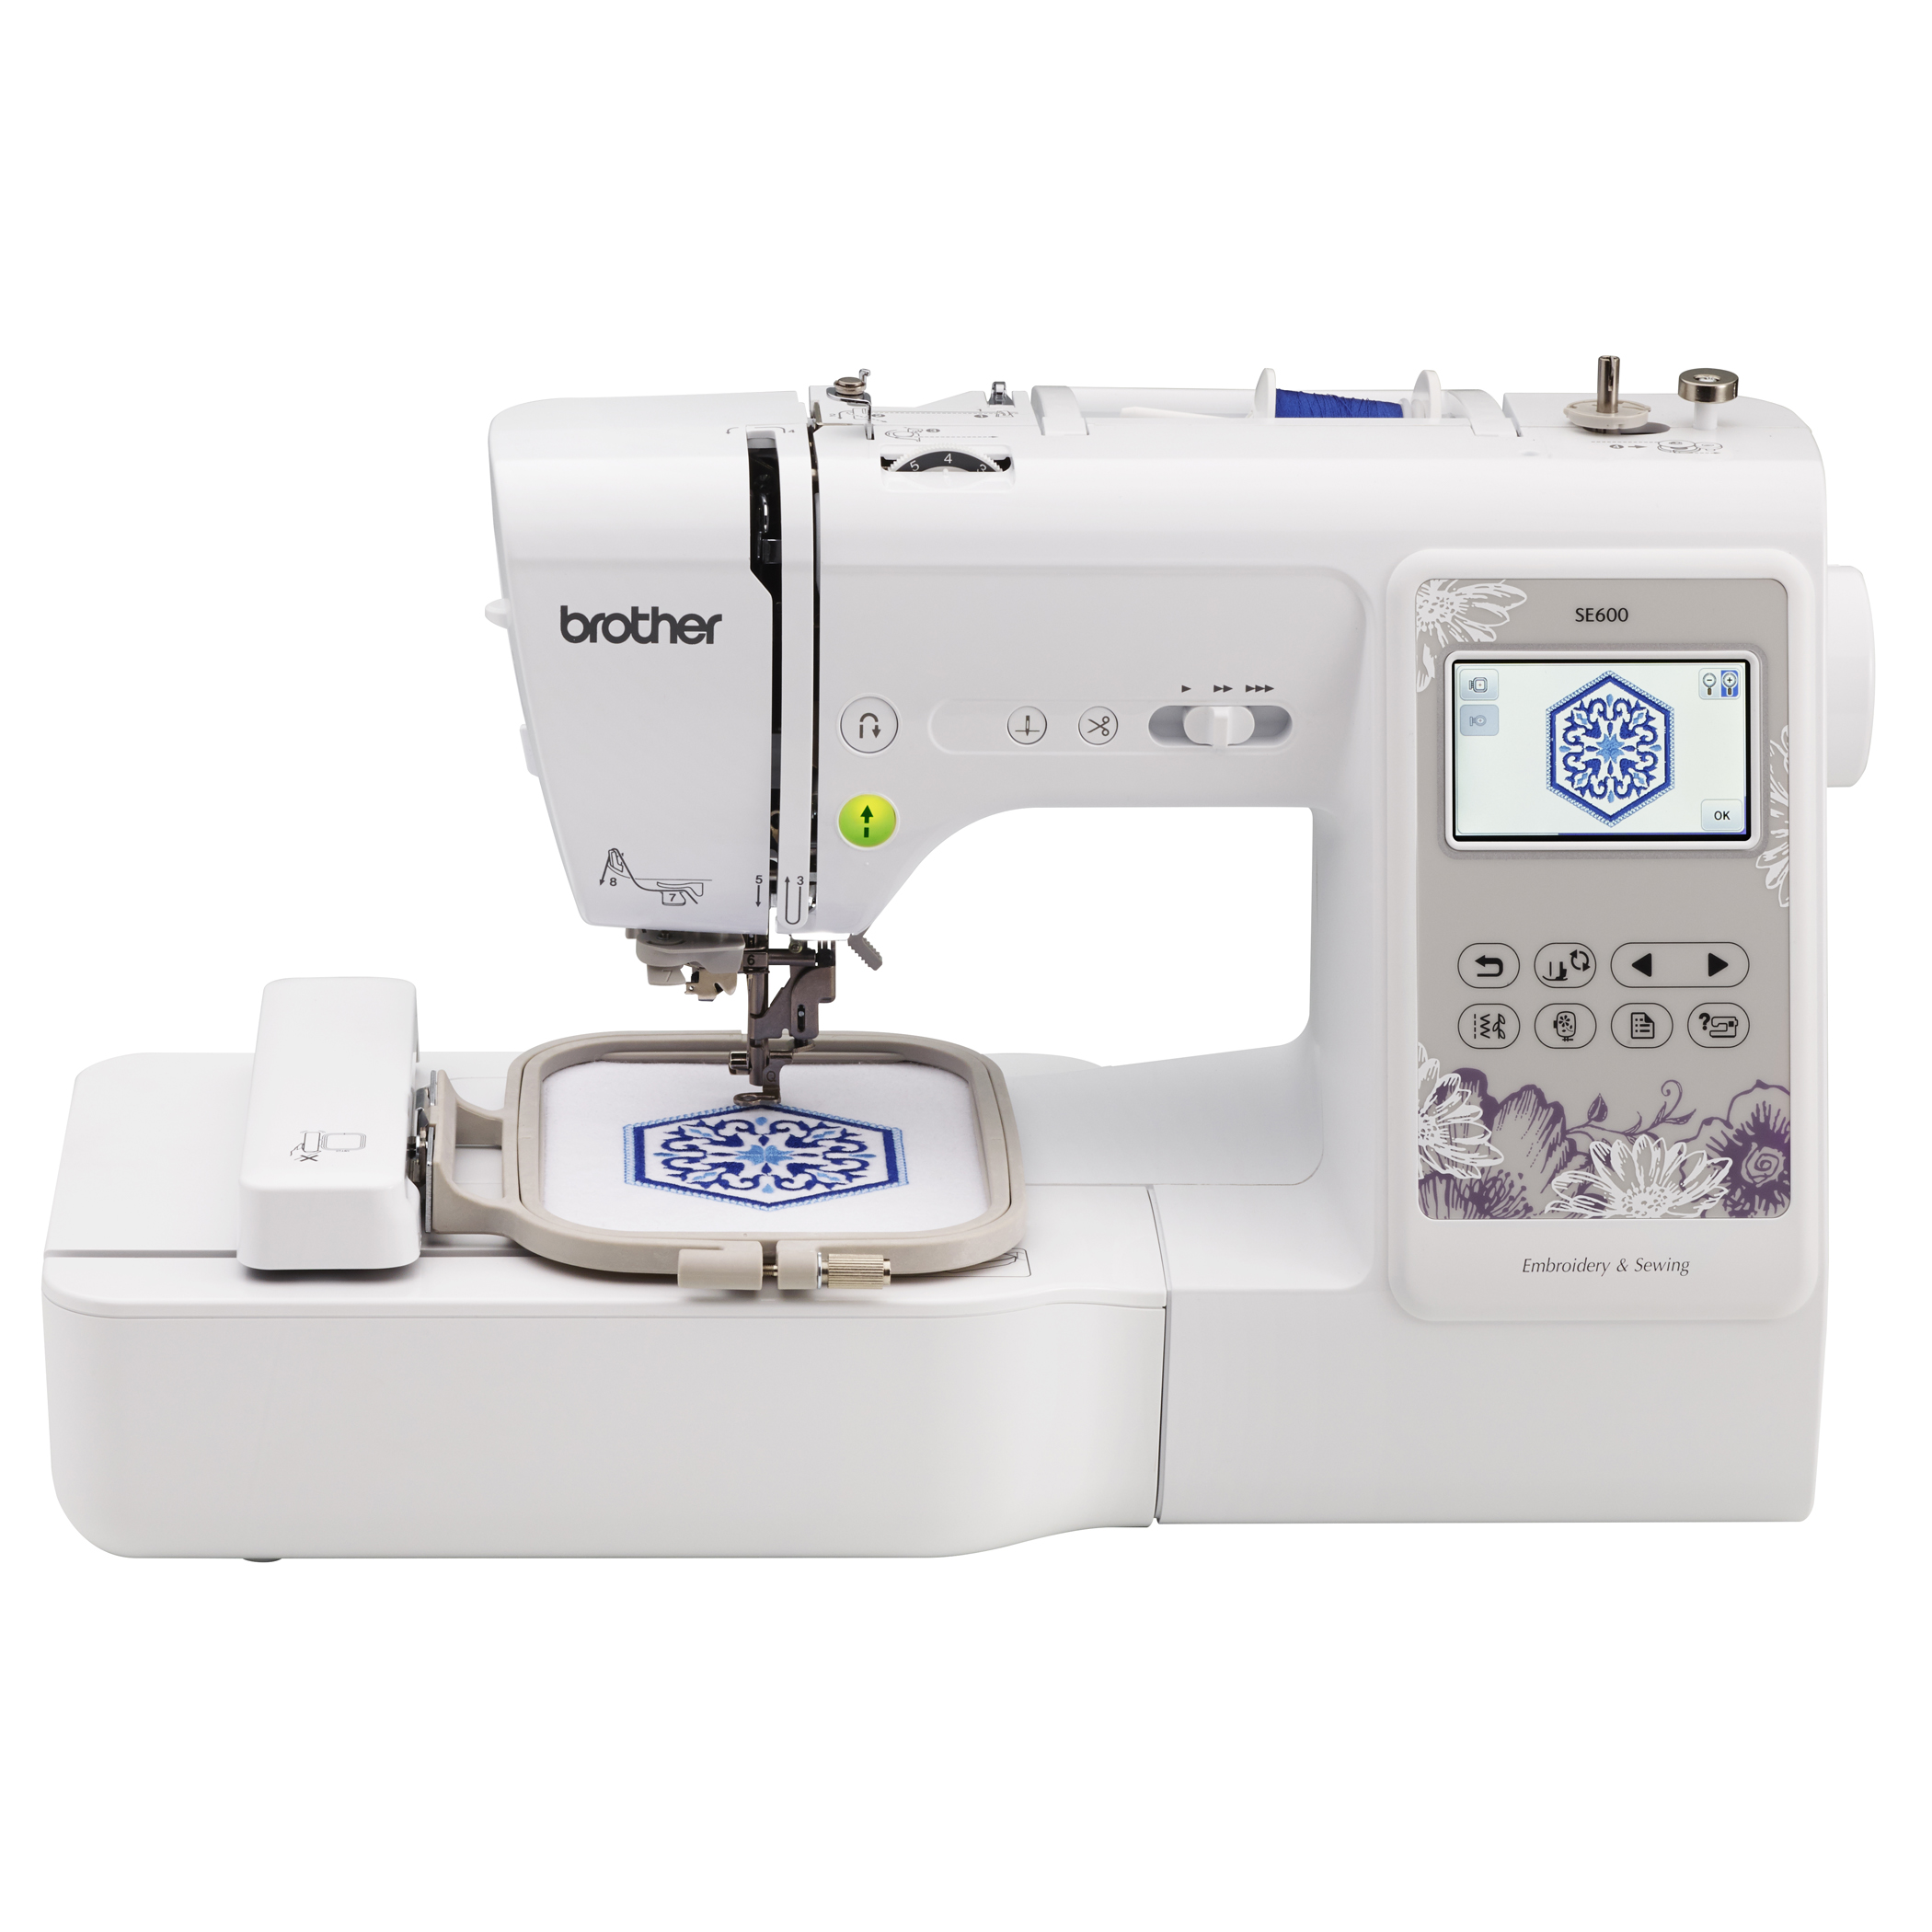 Best Embroidery Machine for Home Business UK in 2020